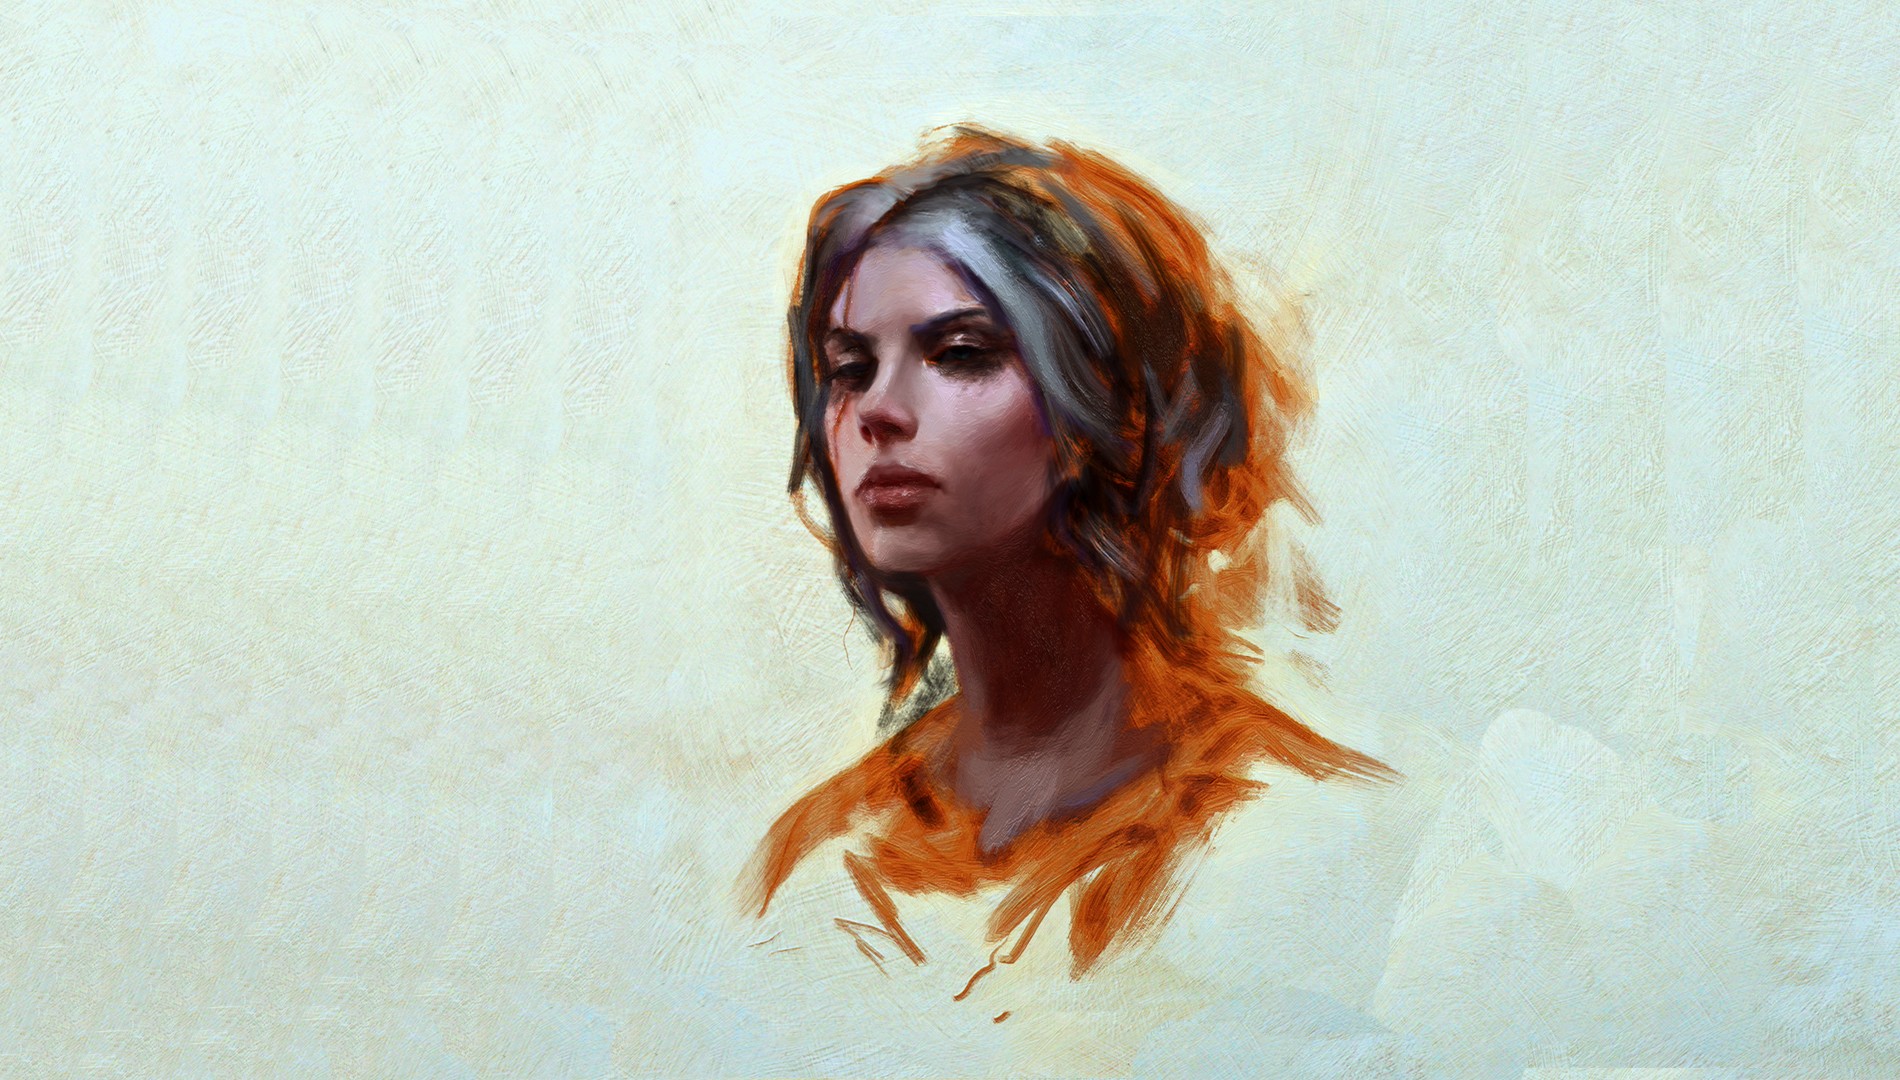 General 1900x1080 Cirilla Fiona Elen Riannon fantasy girl artwork video games The Witcher drawing PC gaming RPG video game girls women